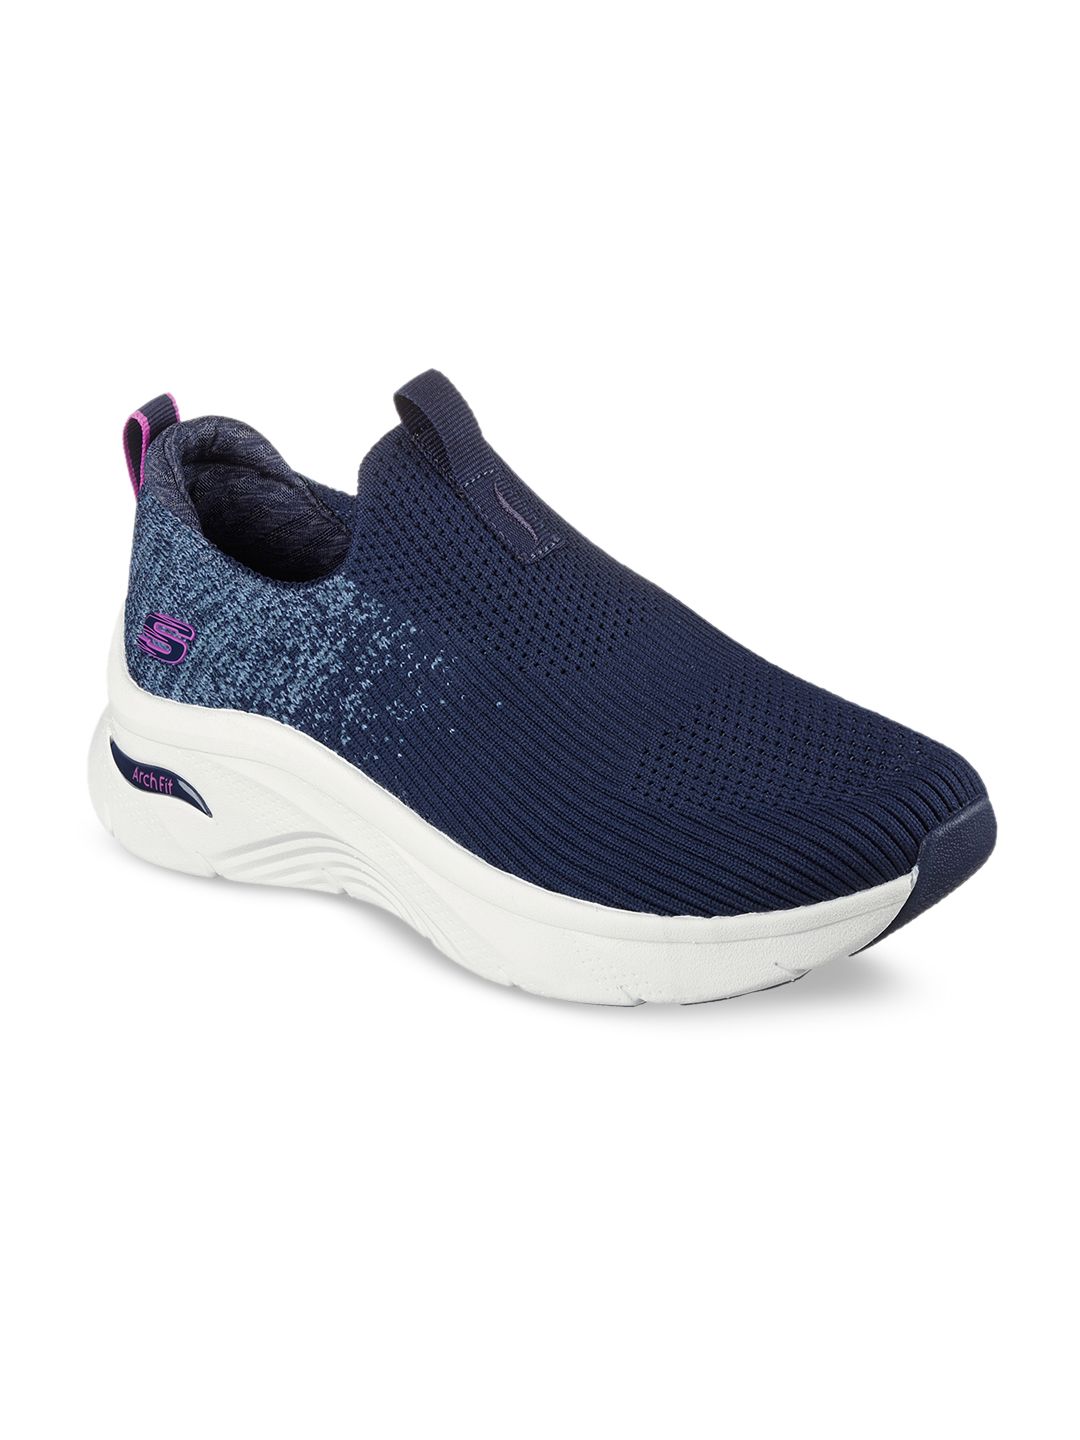 Skechers Women ARCH FIT D'LUX-JOURNEY Slip On Sneakers Price in India